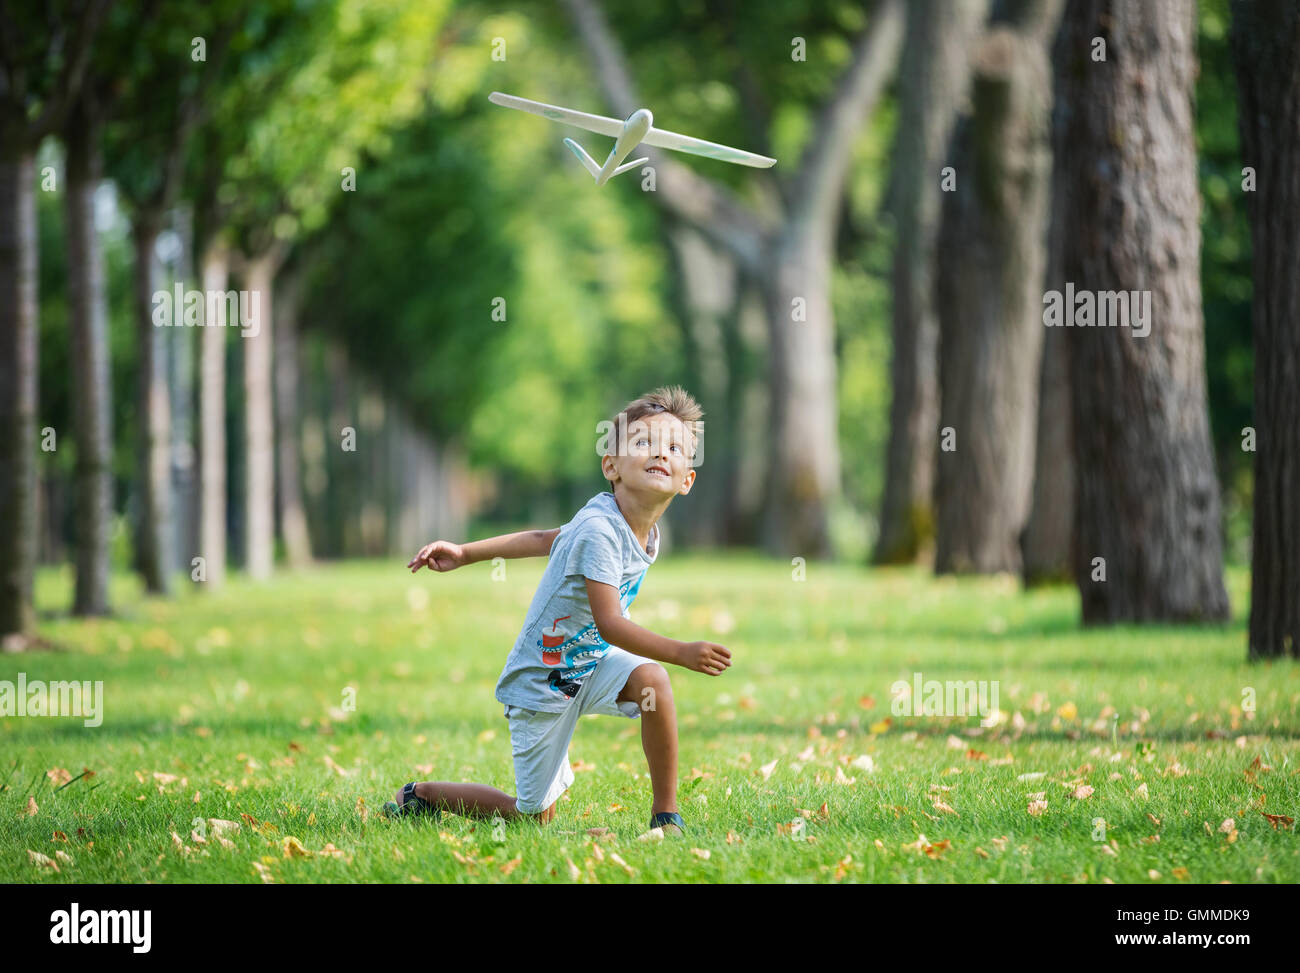 Boy playing with toy glider in park on summer day Stock Photo